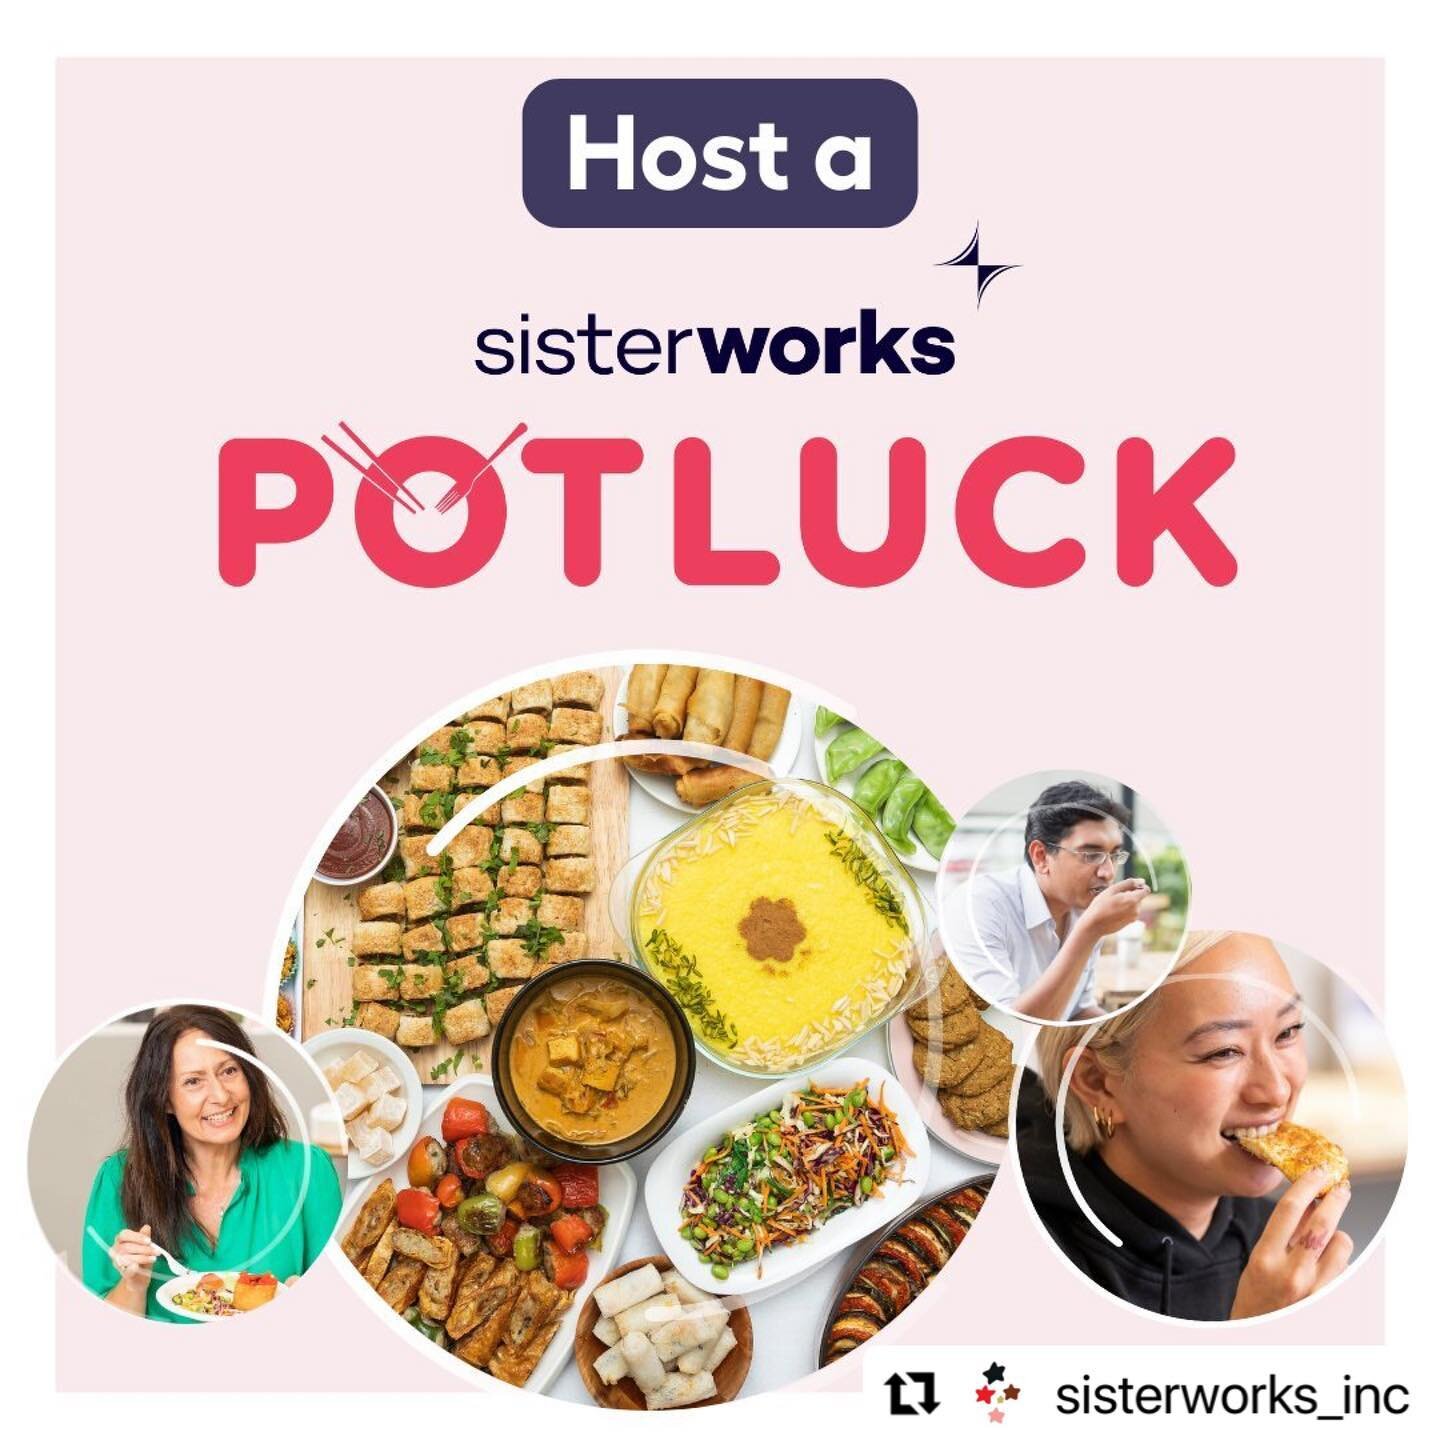 Repost @sisterworks_inc with @use.repost
・・・
SisterWorks Potluck - our new fundraising inititive has just launched! We want you to organise a Potluck/share a plate for your workplace, friends or famly and help raise funds to economically empower migr